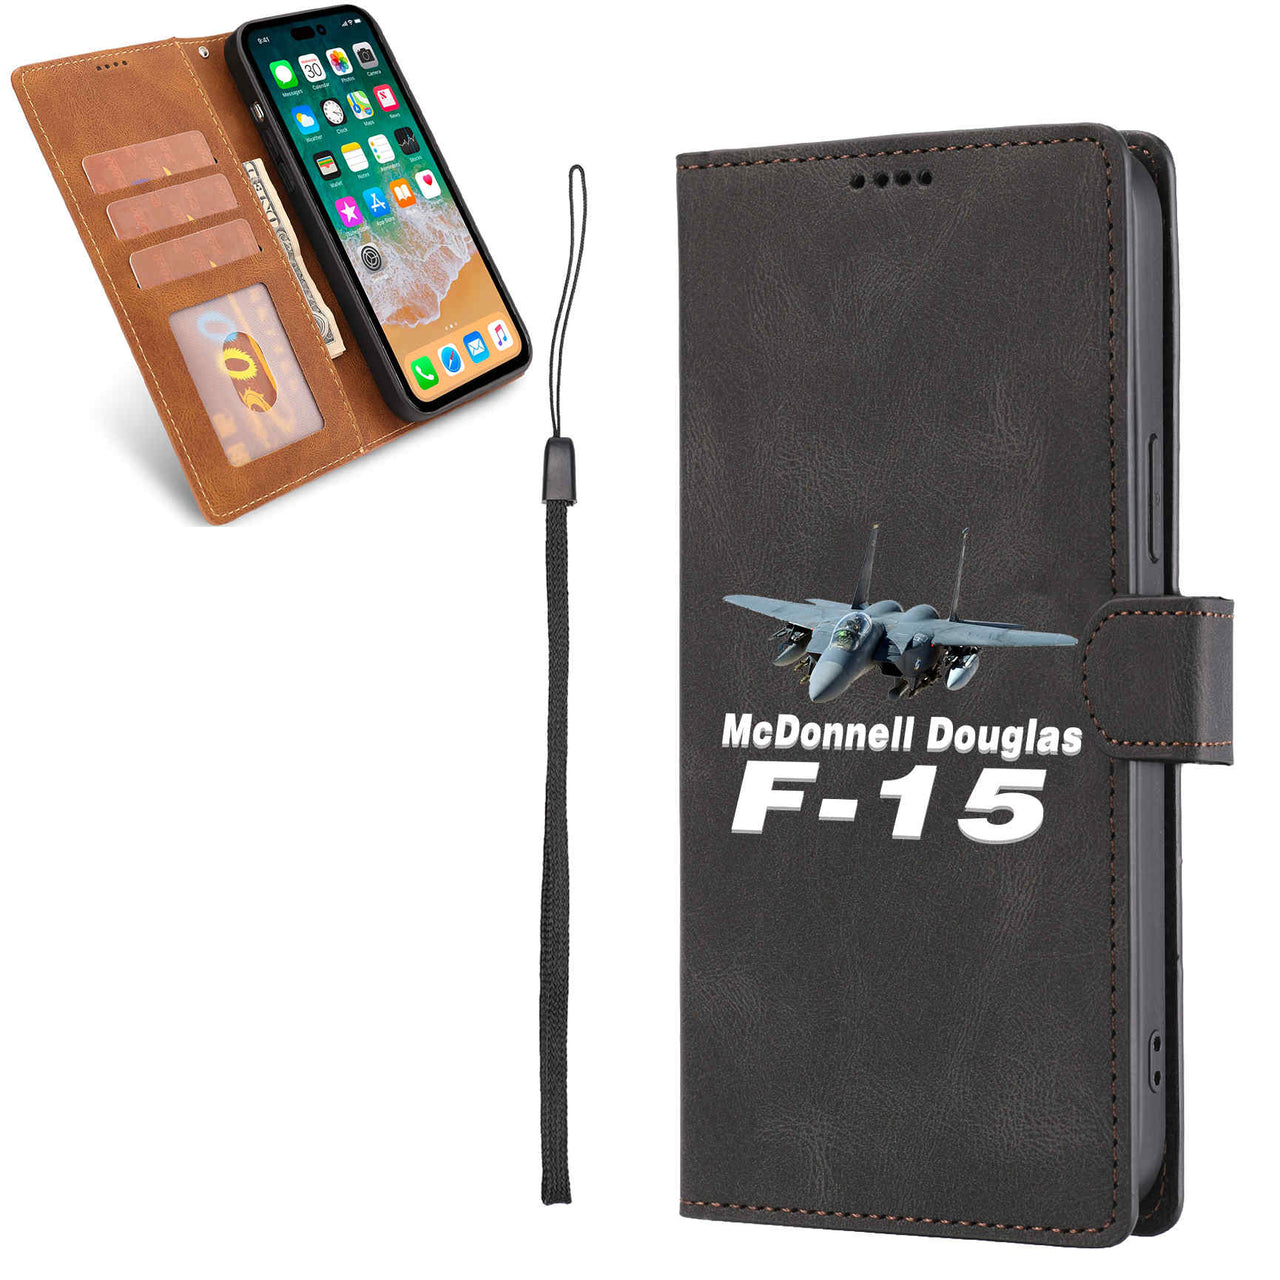 The McDonnell Douglas F15 Leather Samsung A Cases